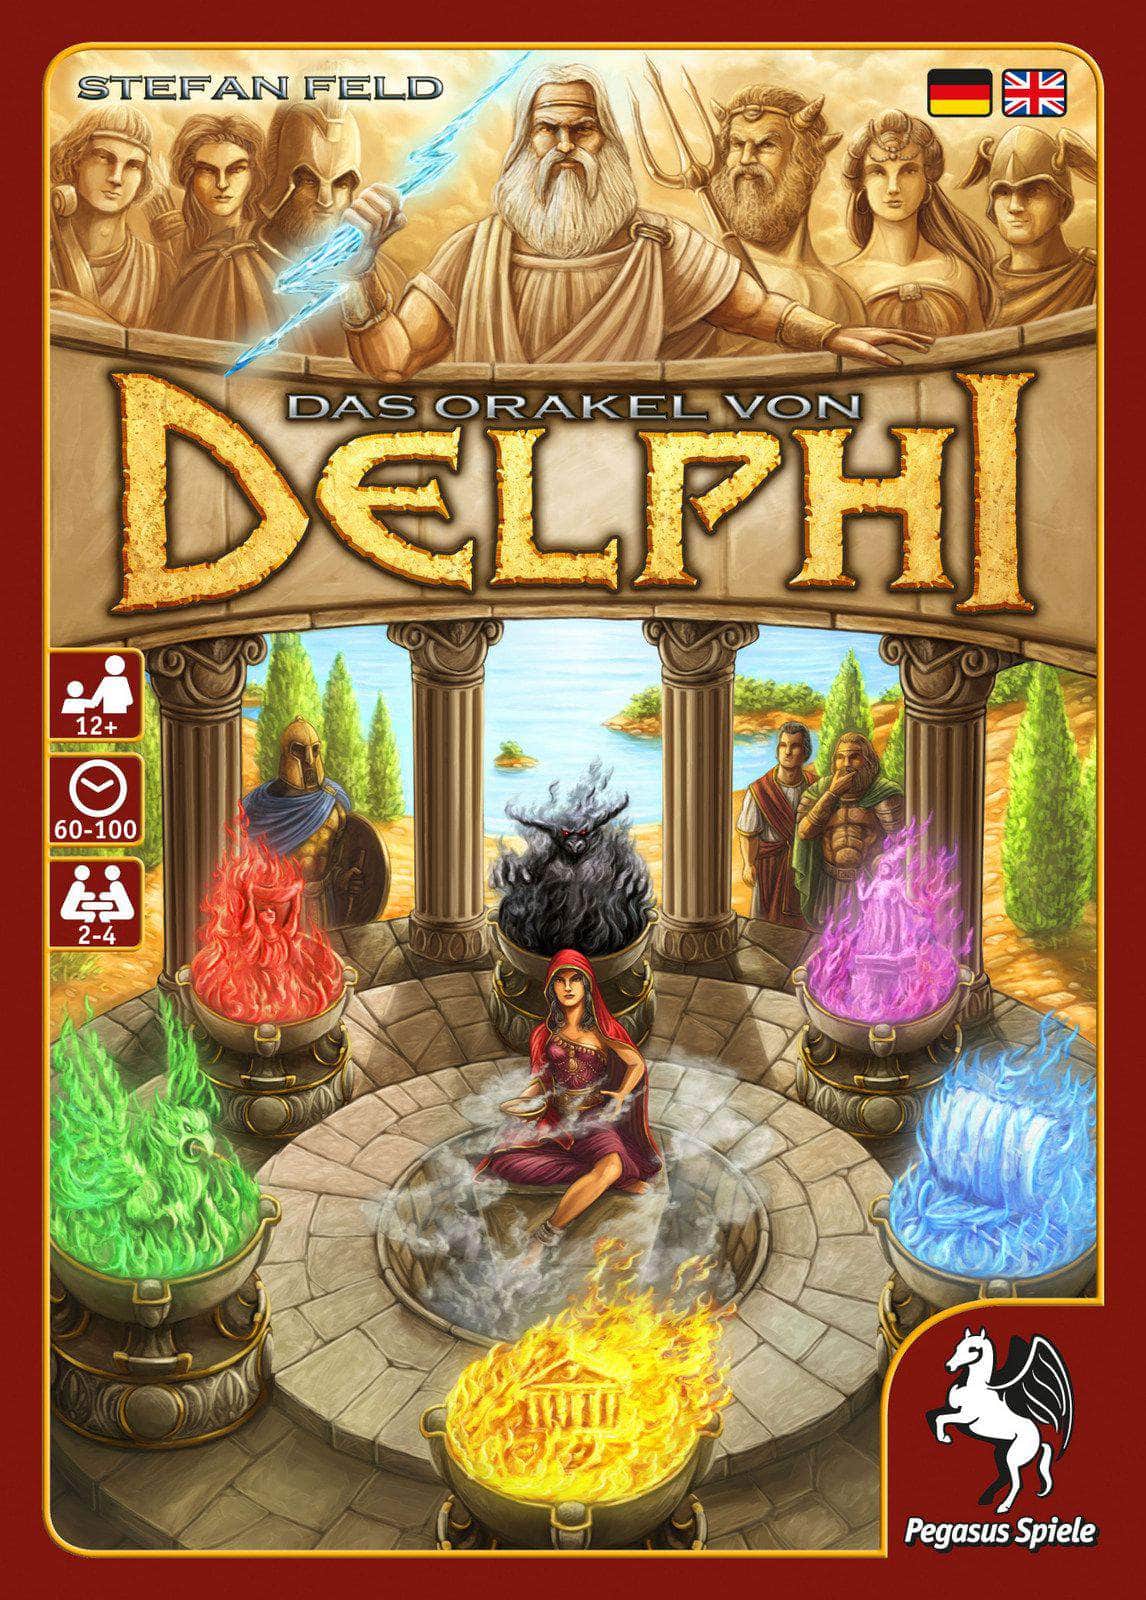 O Oracle of Delphi (Retail Edition) Retail Board Game 999 Games, Cranio Creations, Jogos completos, Hall Games, Hobby Japan, Ludosentinel, Matagot, Pegasus Spiele, Surfin 'Meeple China, Tasty Minstrel Games KS800490A